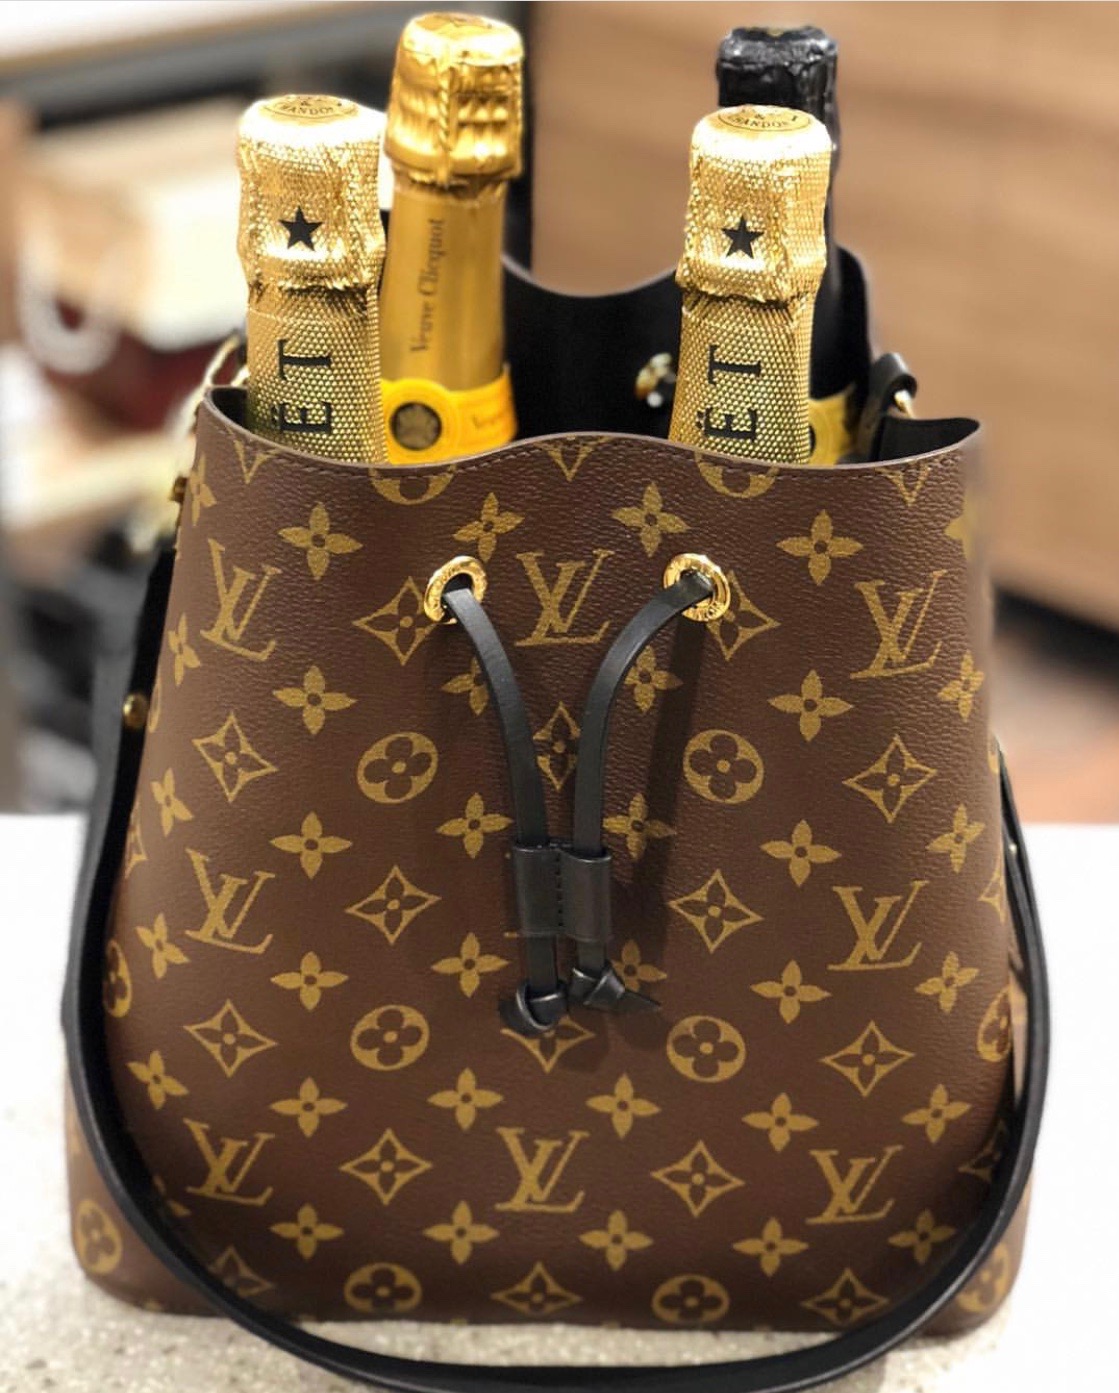 The name alone already says many things about Louis Vuitton's newest p